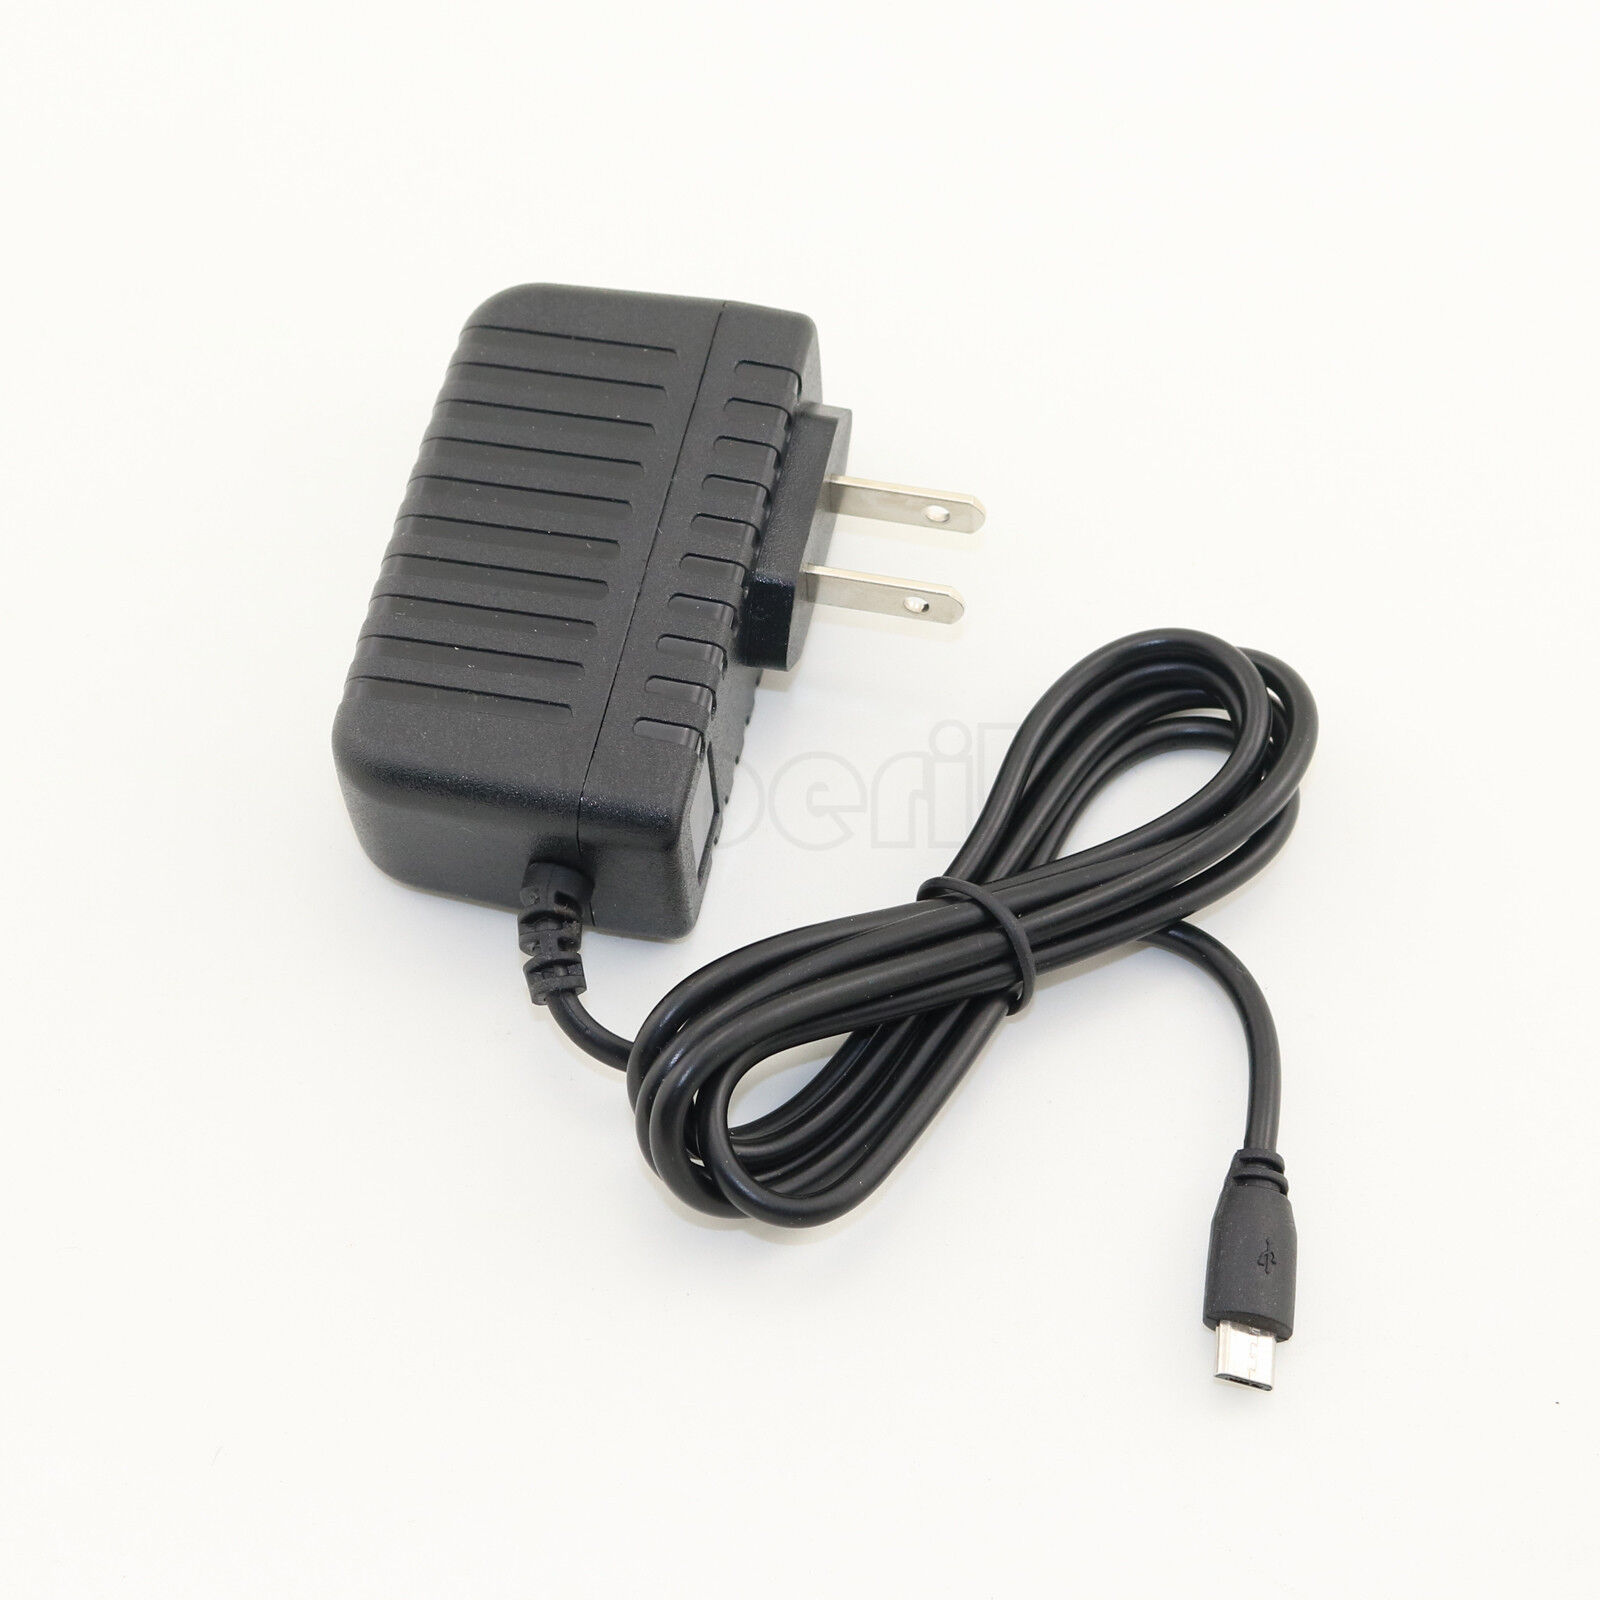 *Brand NEW* Replace 5V 2A AC Power Adapter Micro USB Wall Charger For Anker Astro E3 E4 E5